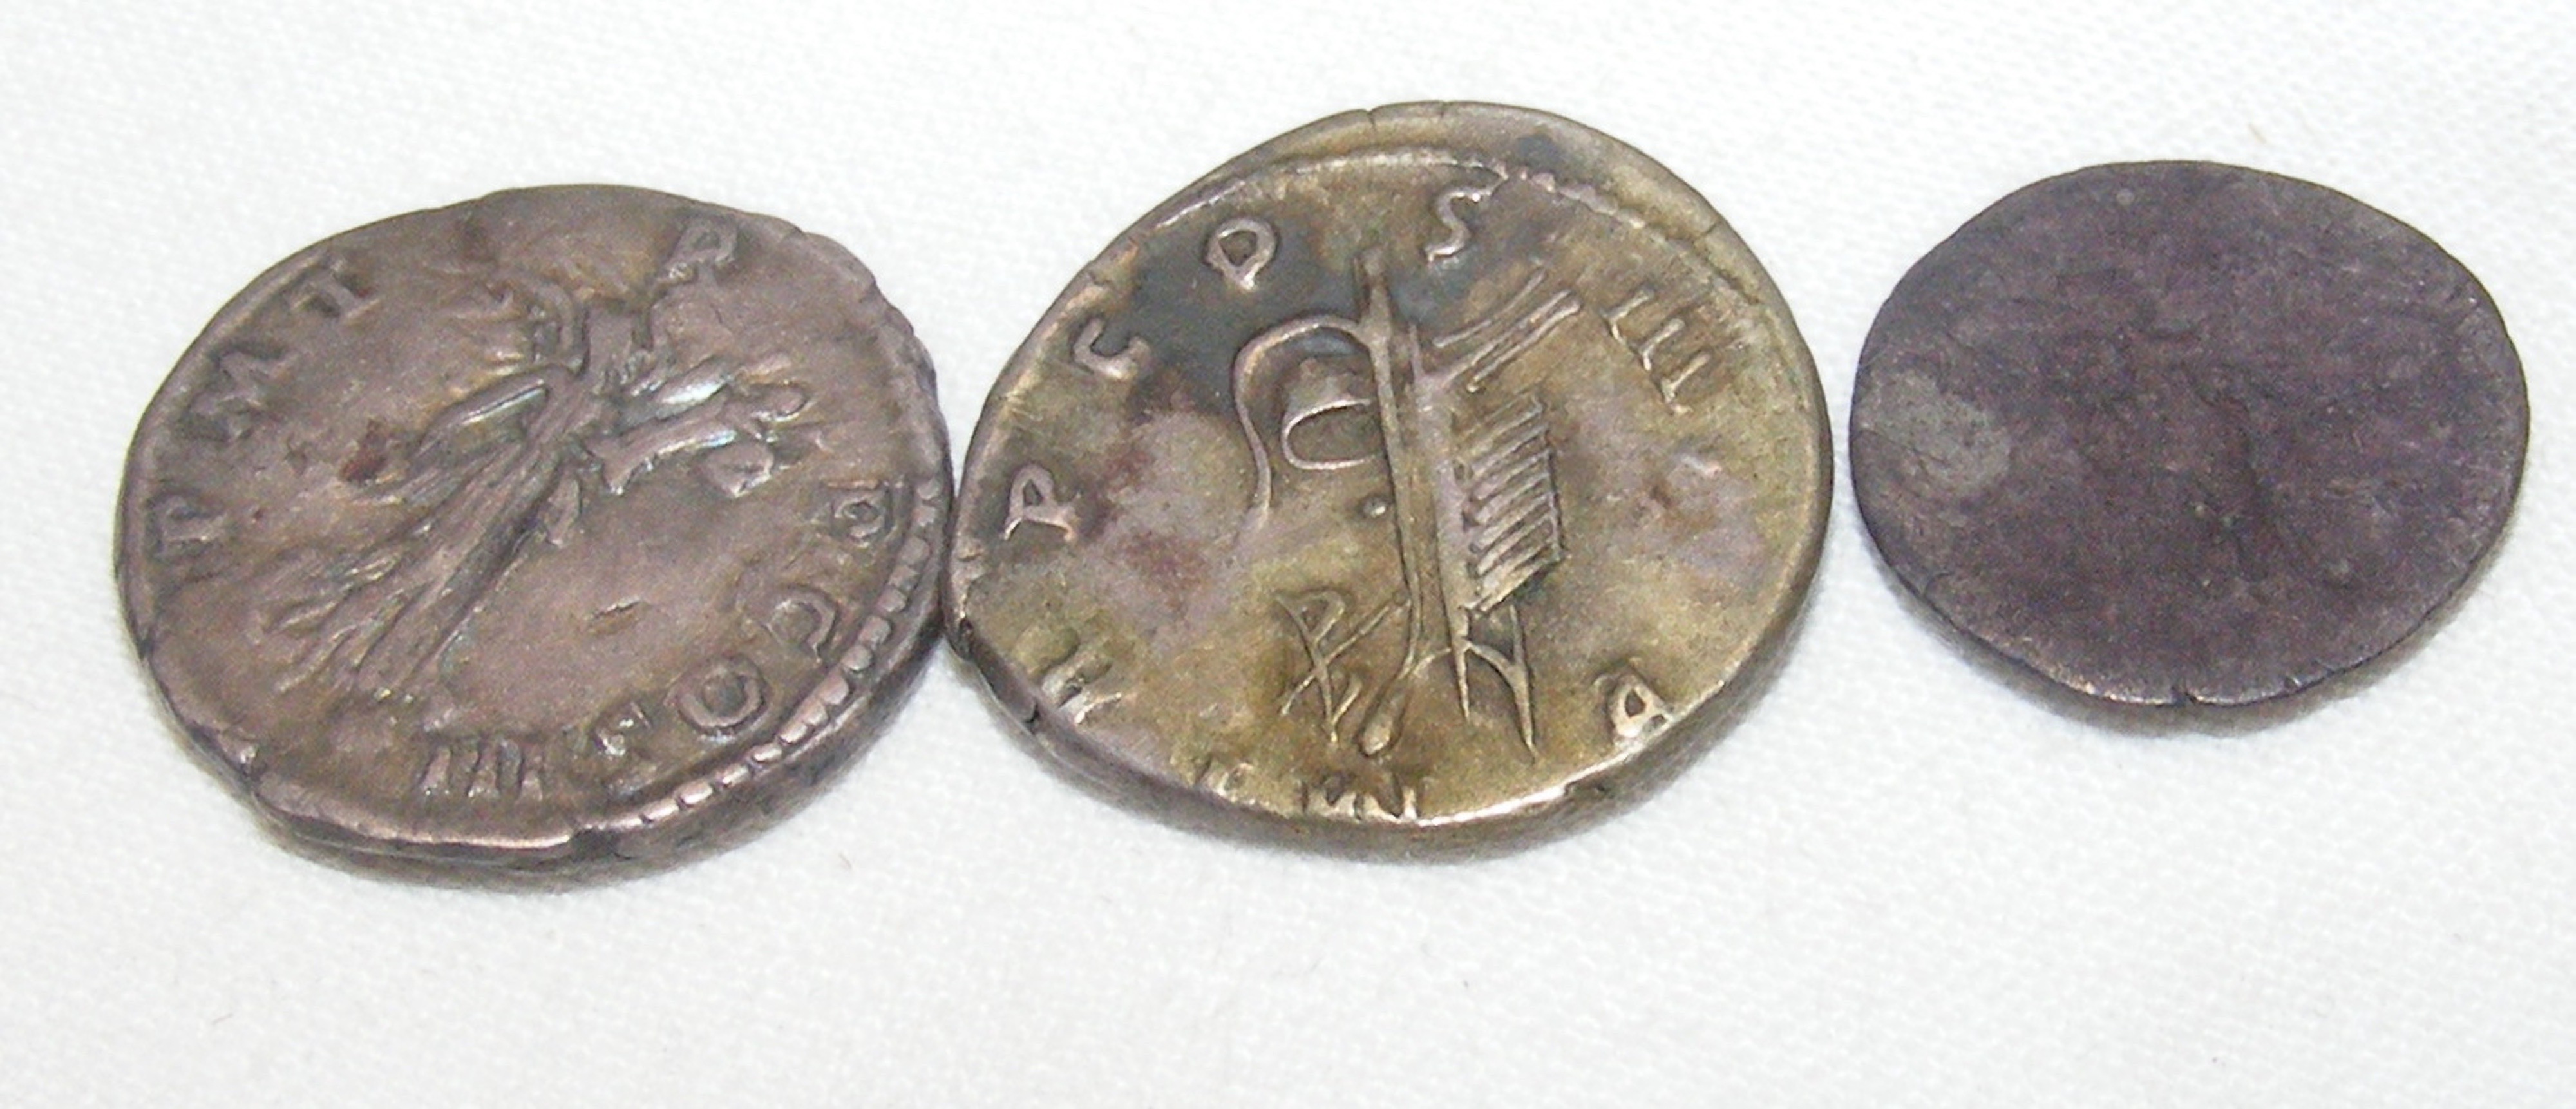 Two Roman silver coins, Hadrian (AD117-138) - 3.1 - Image 2 of 2